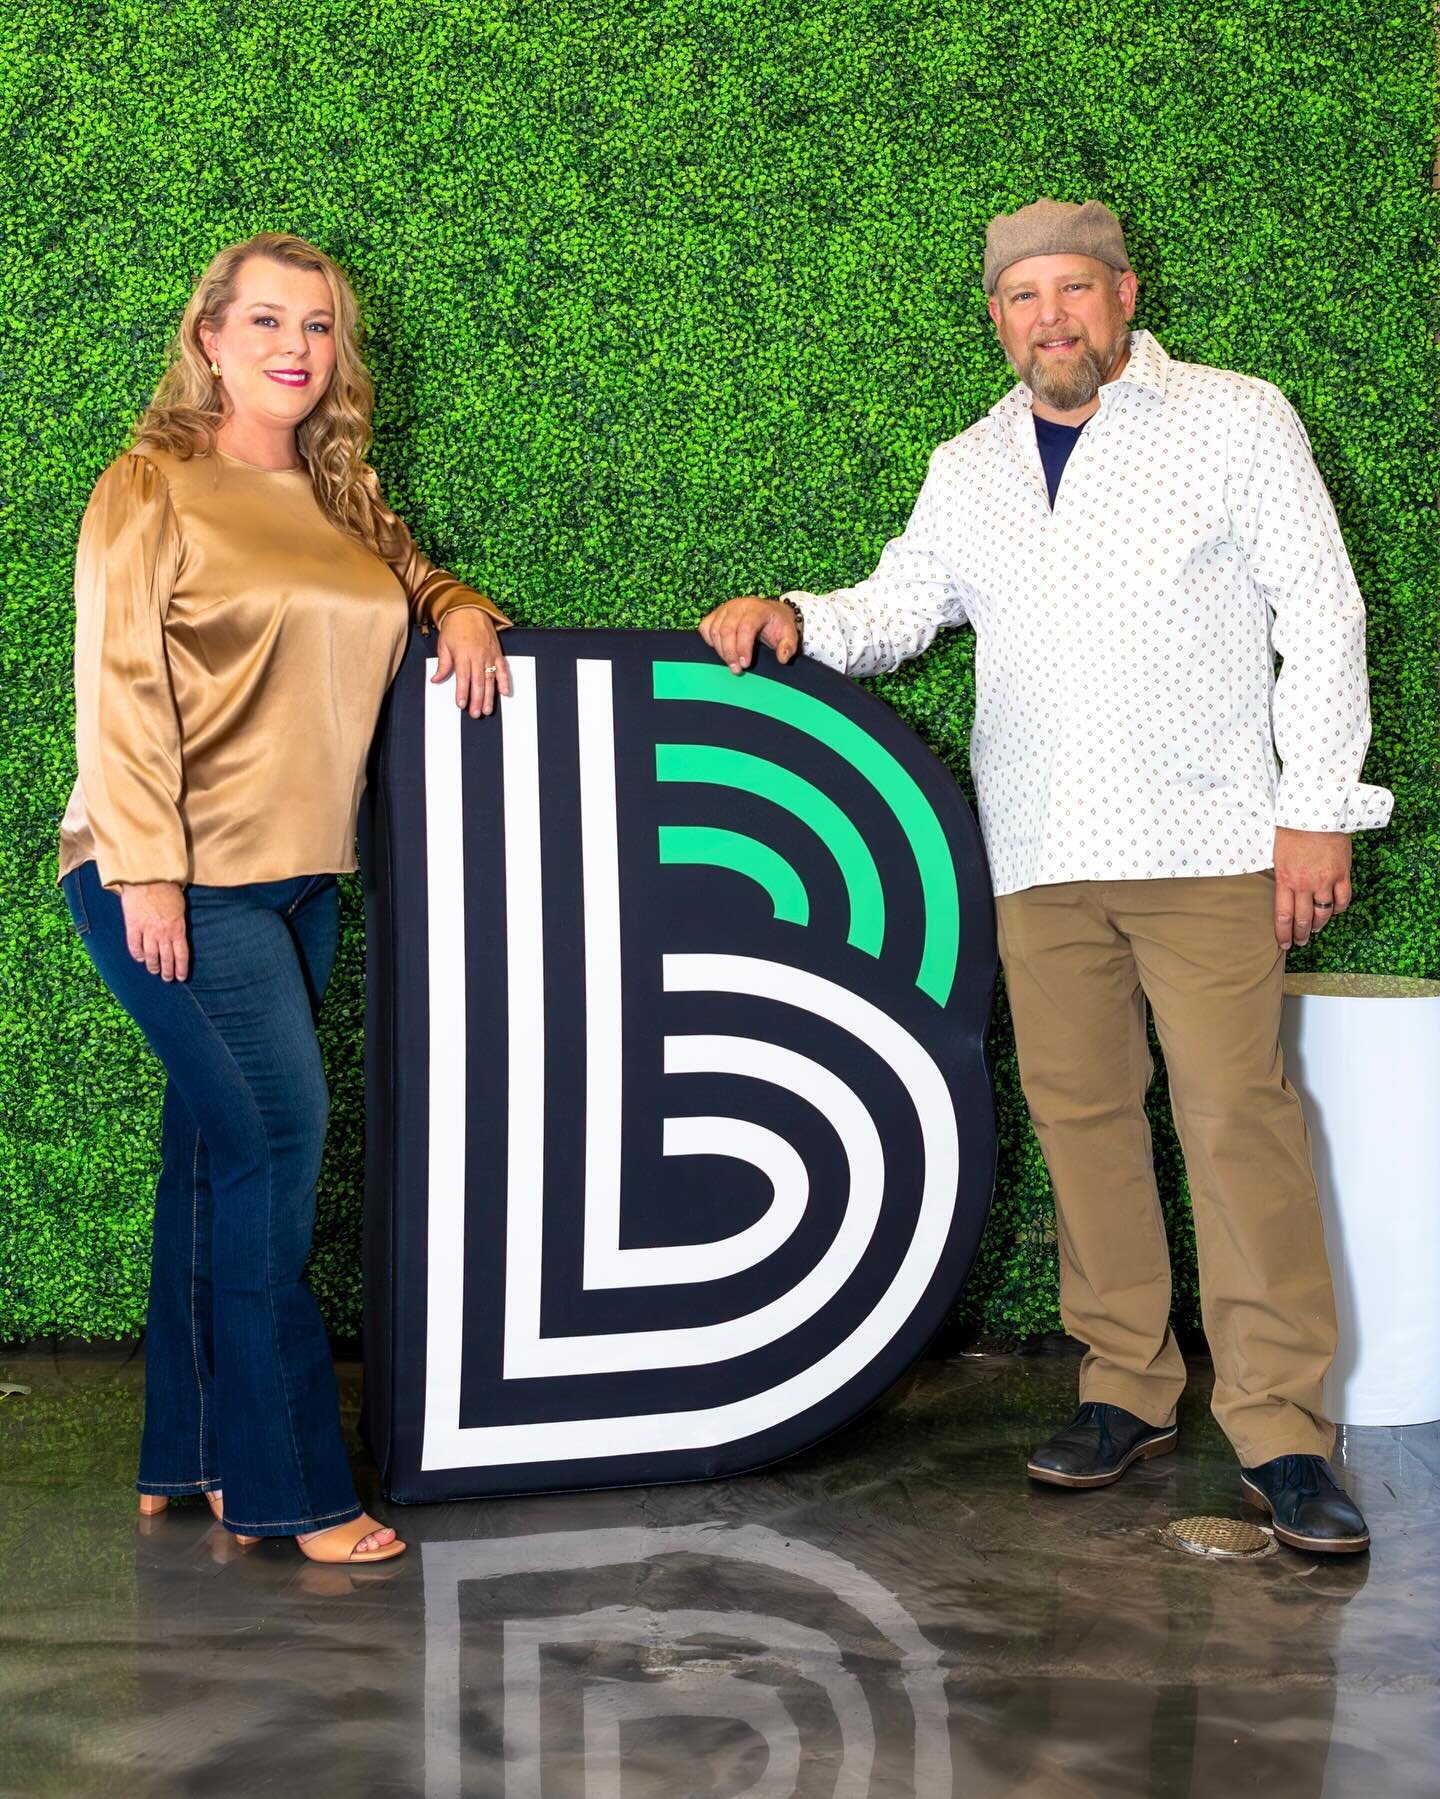 With over 40 years of combined experience in the event industry, Jim and Layla Parker are part of the ACCESS family. Why? They&rsquo;re always professional, fair, happy, and just as invested as we are when it comes to a planning a successful mega bas